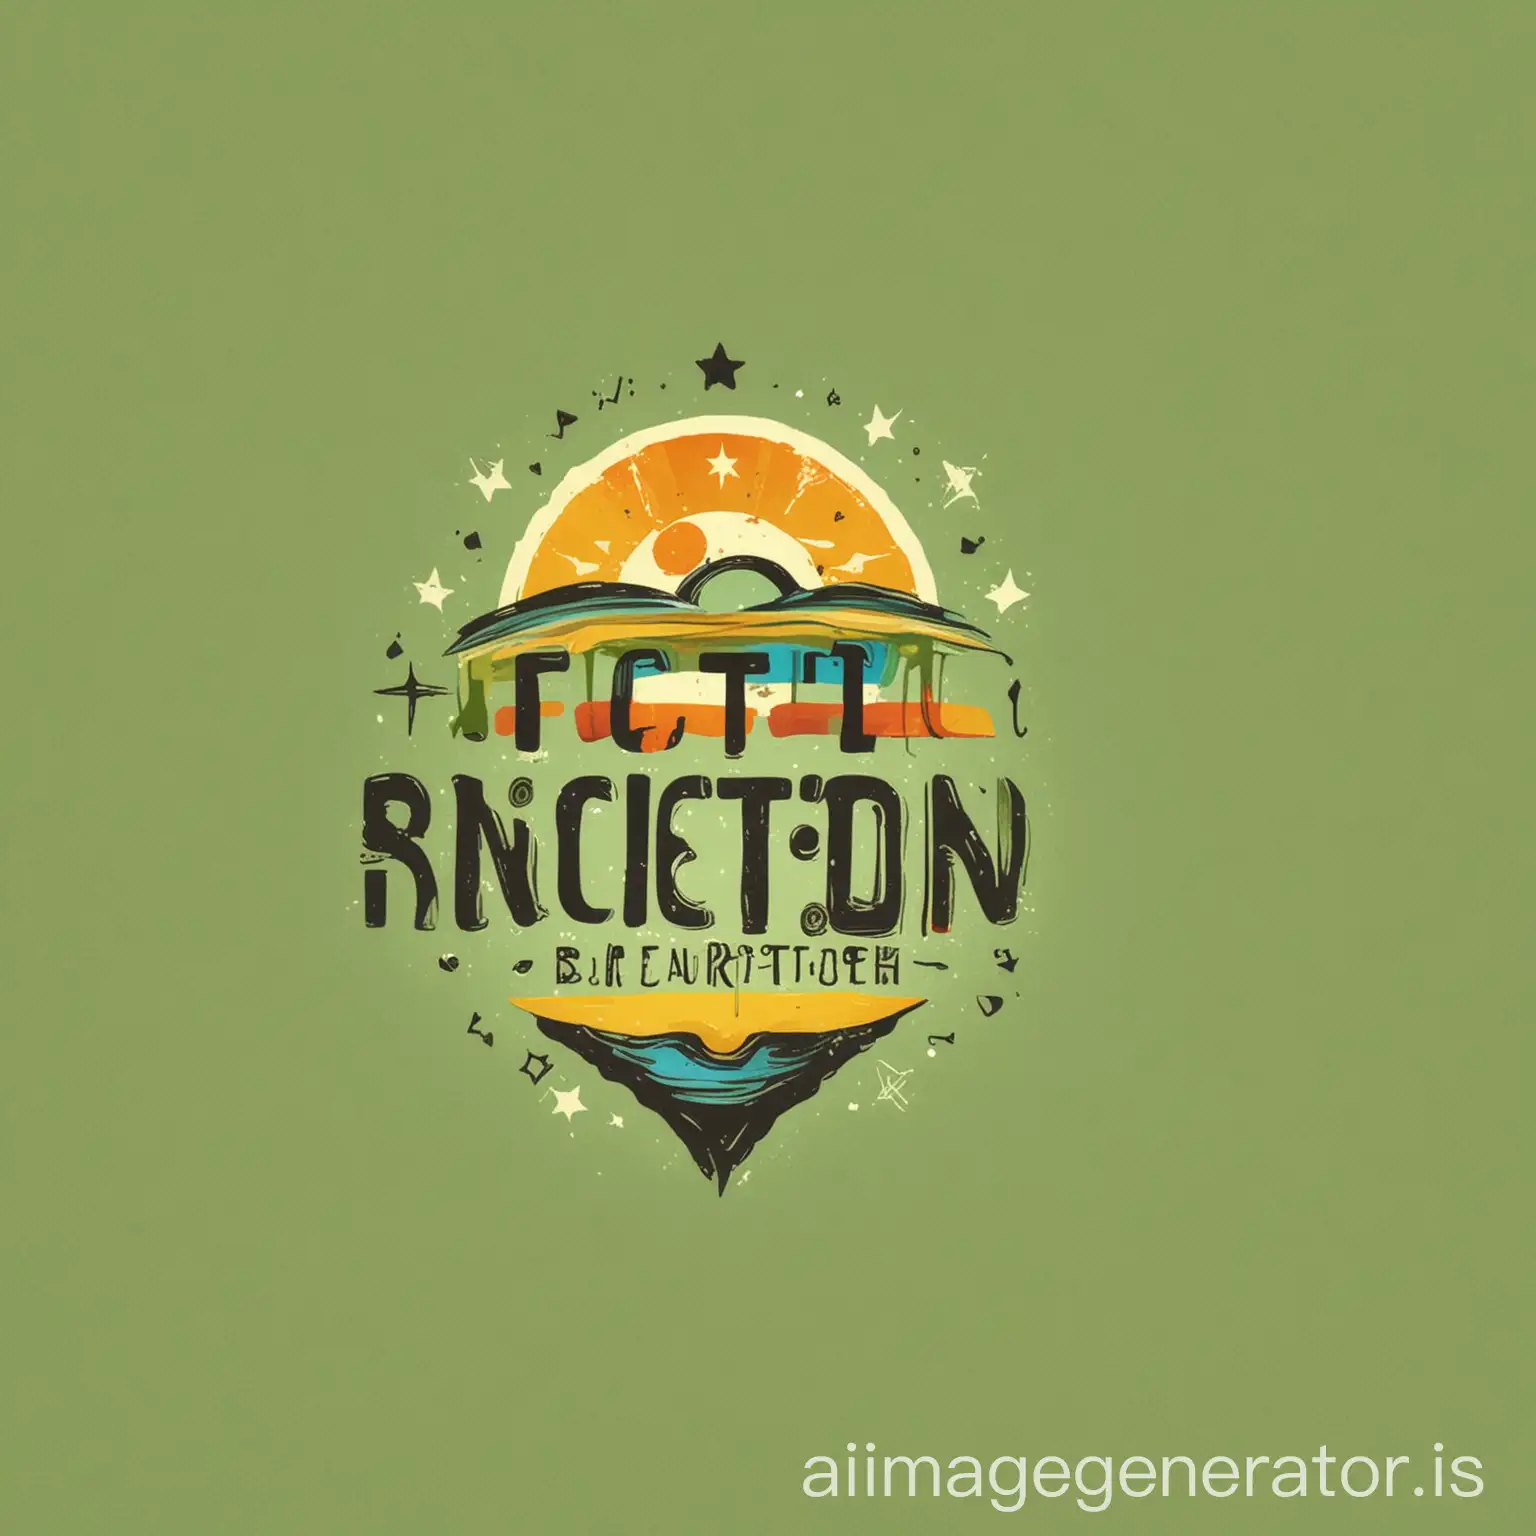 Design a simple logo for a 'fiction scenification' website, theme is 'fiction reification', style cheerful, simple, bright, fresh